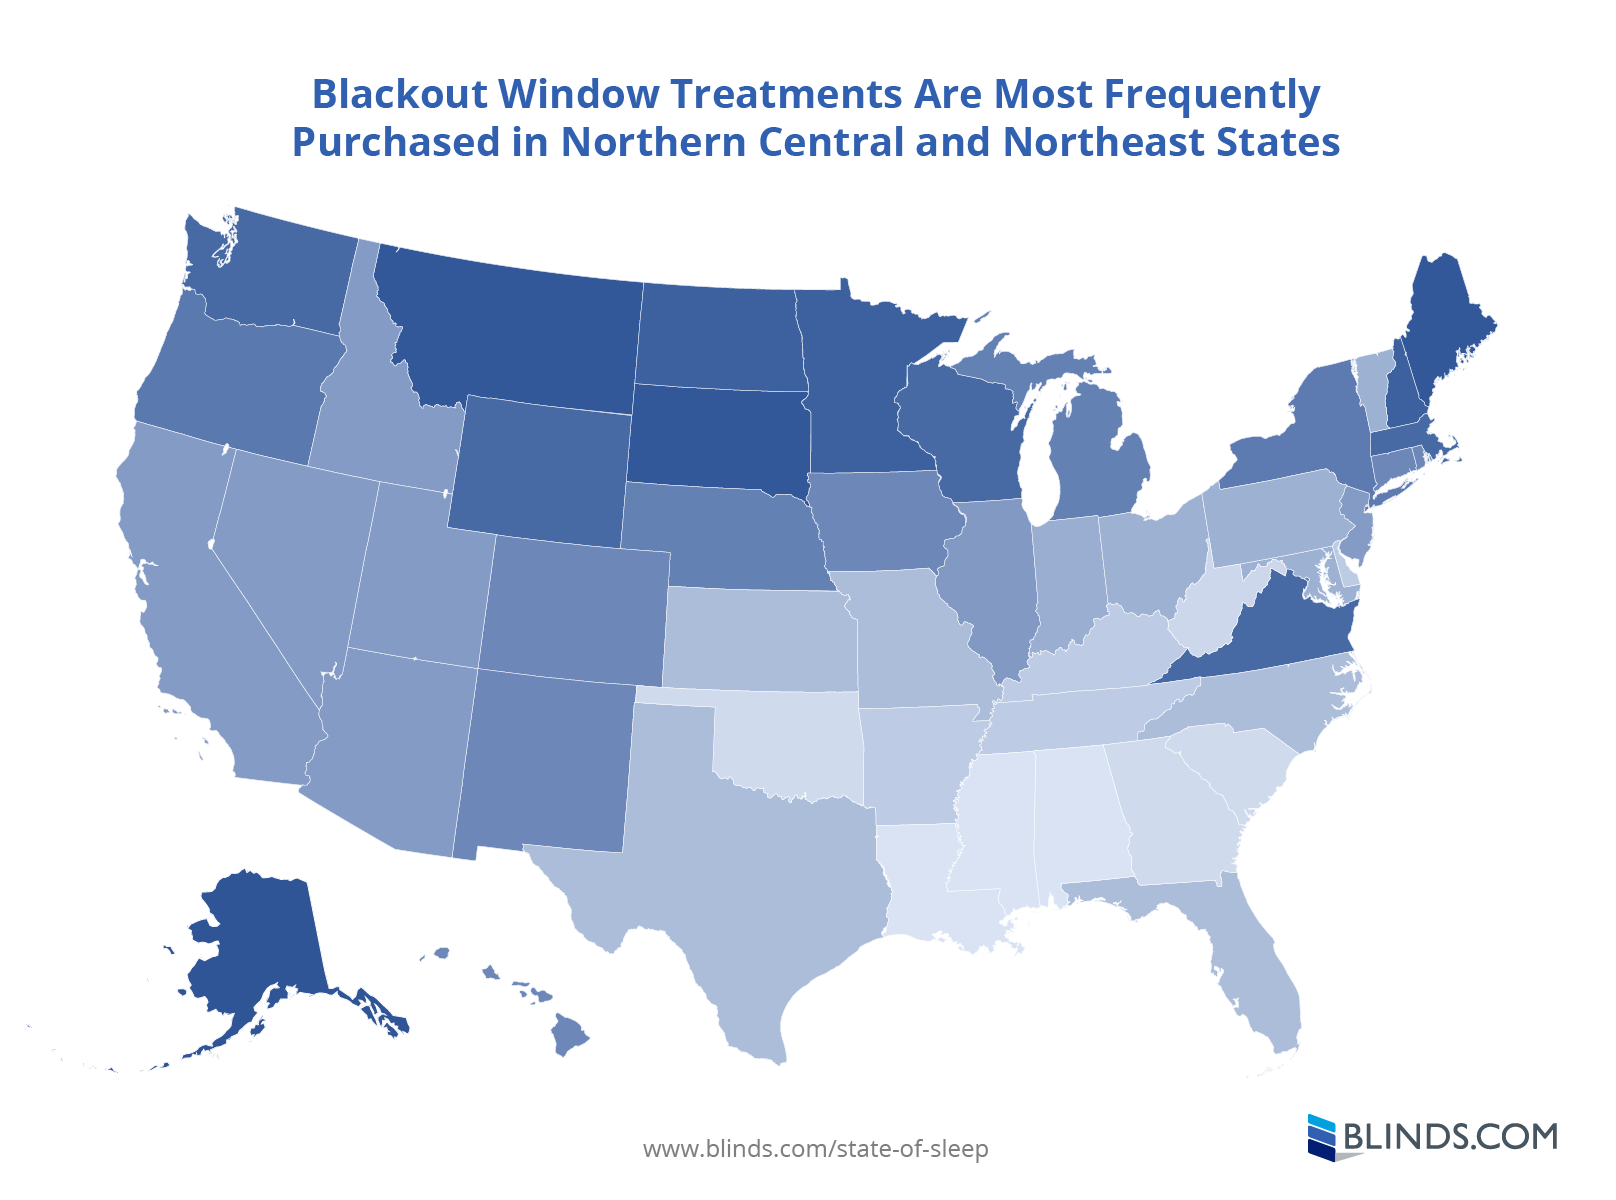 Blackout Window Treatments Are Most Frequently Purchased in the Northern Central and Northeast States